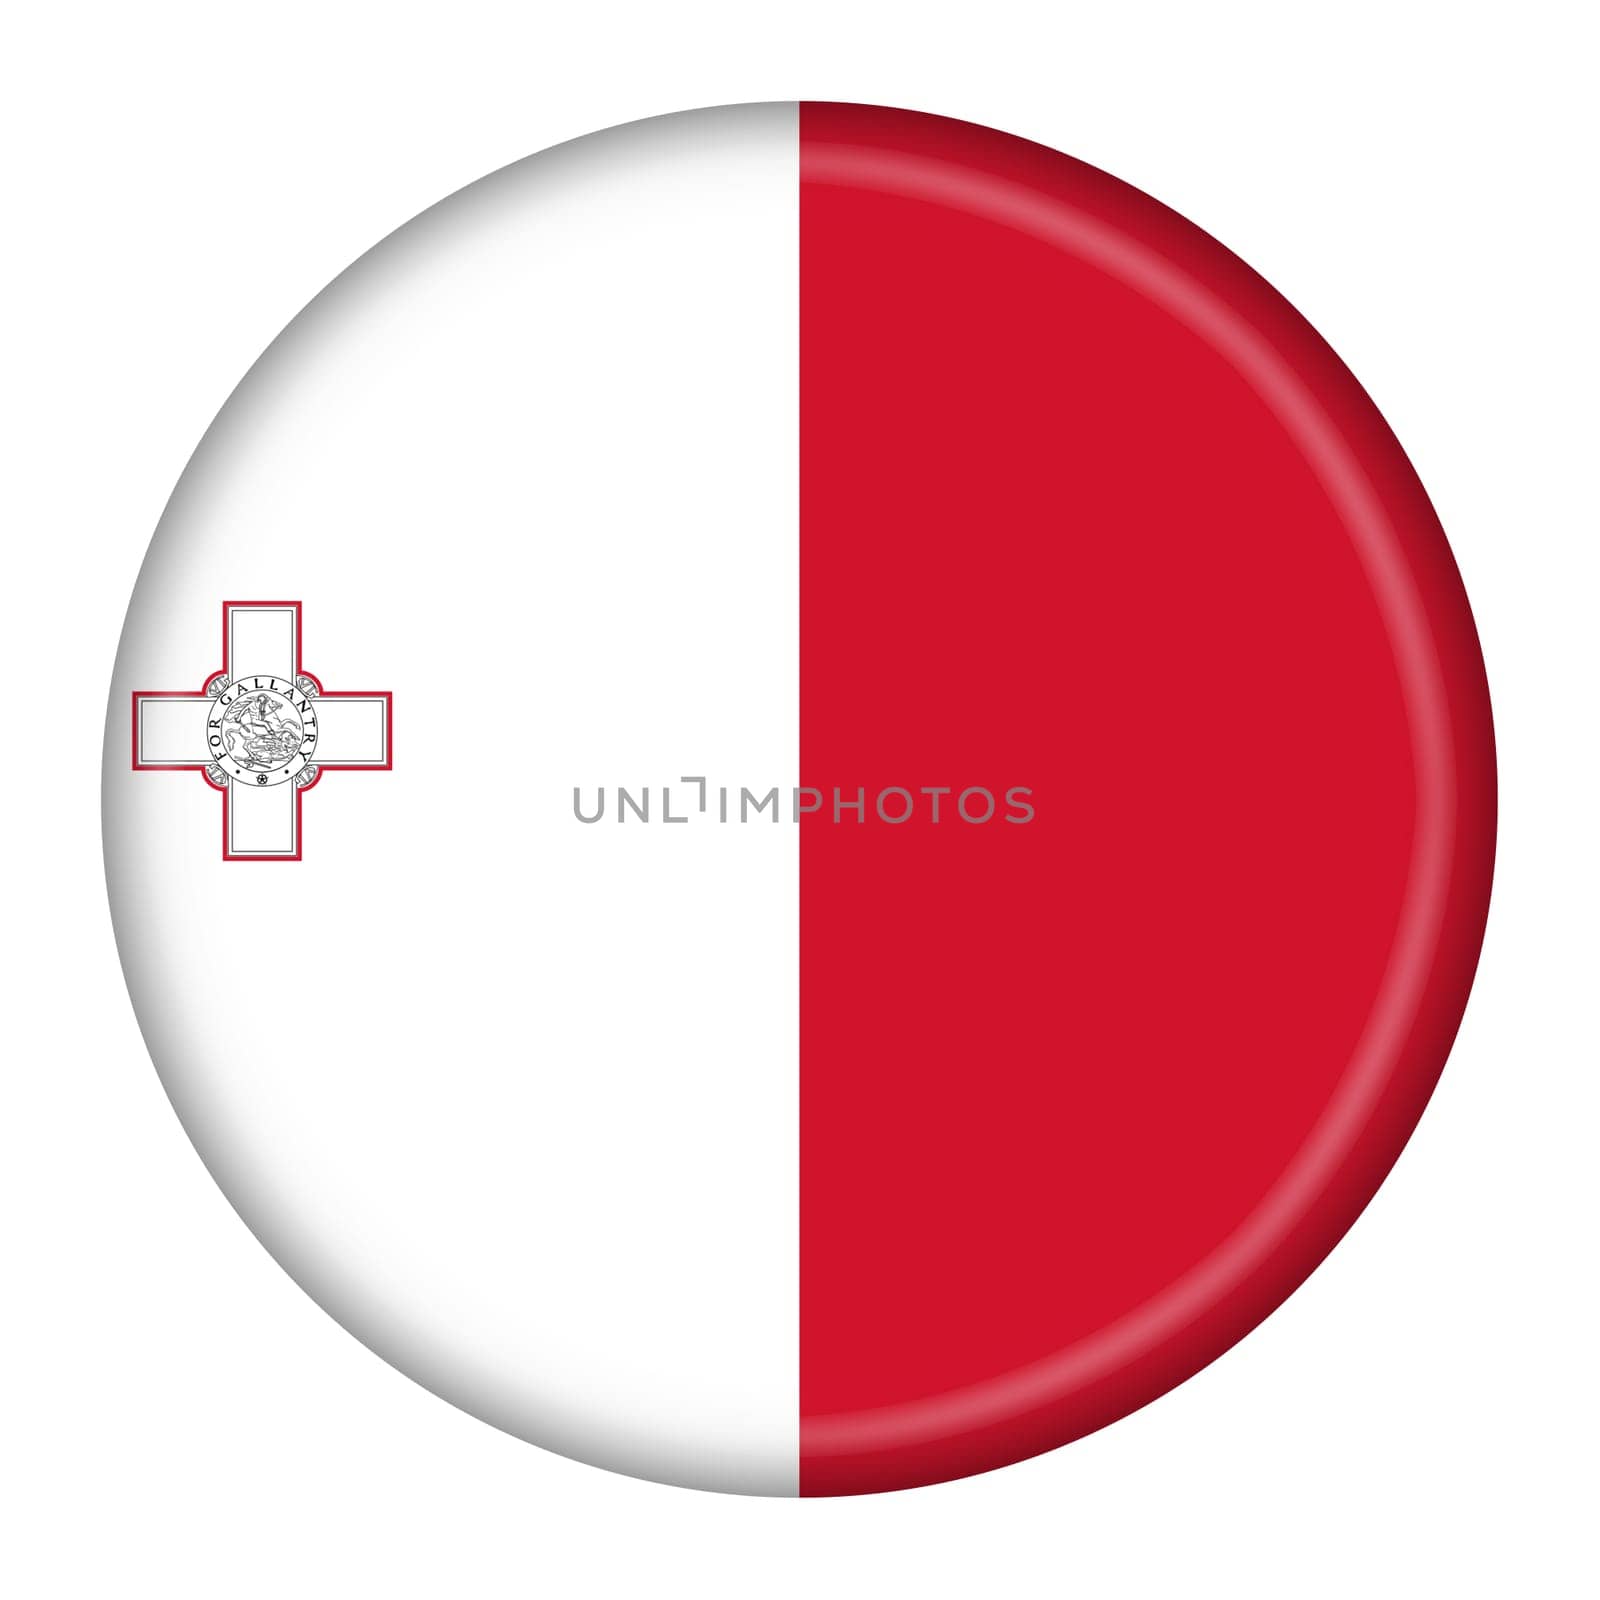 Malta flag button 3d illustration with clipping path by VivacityImages